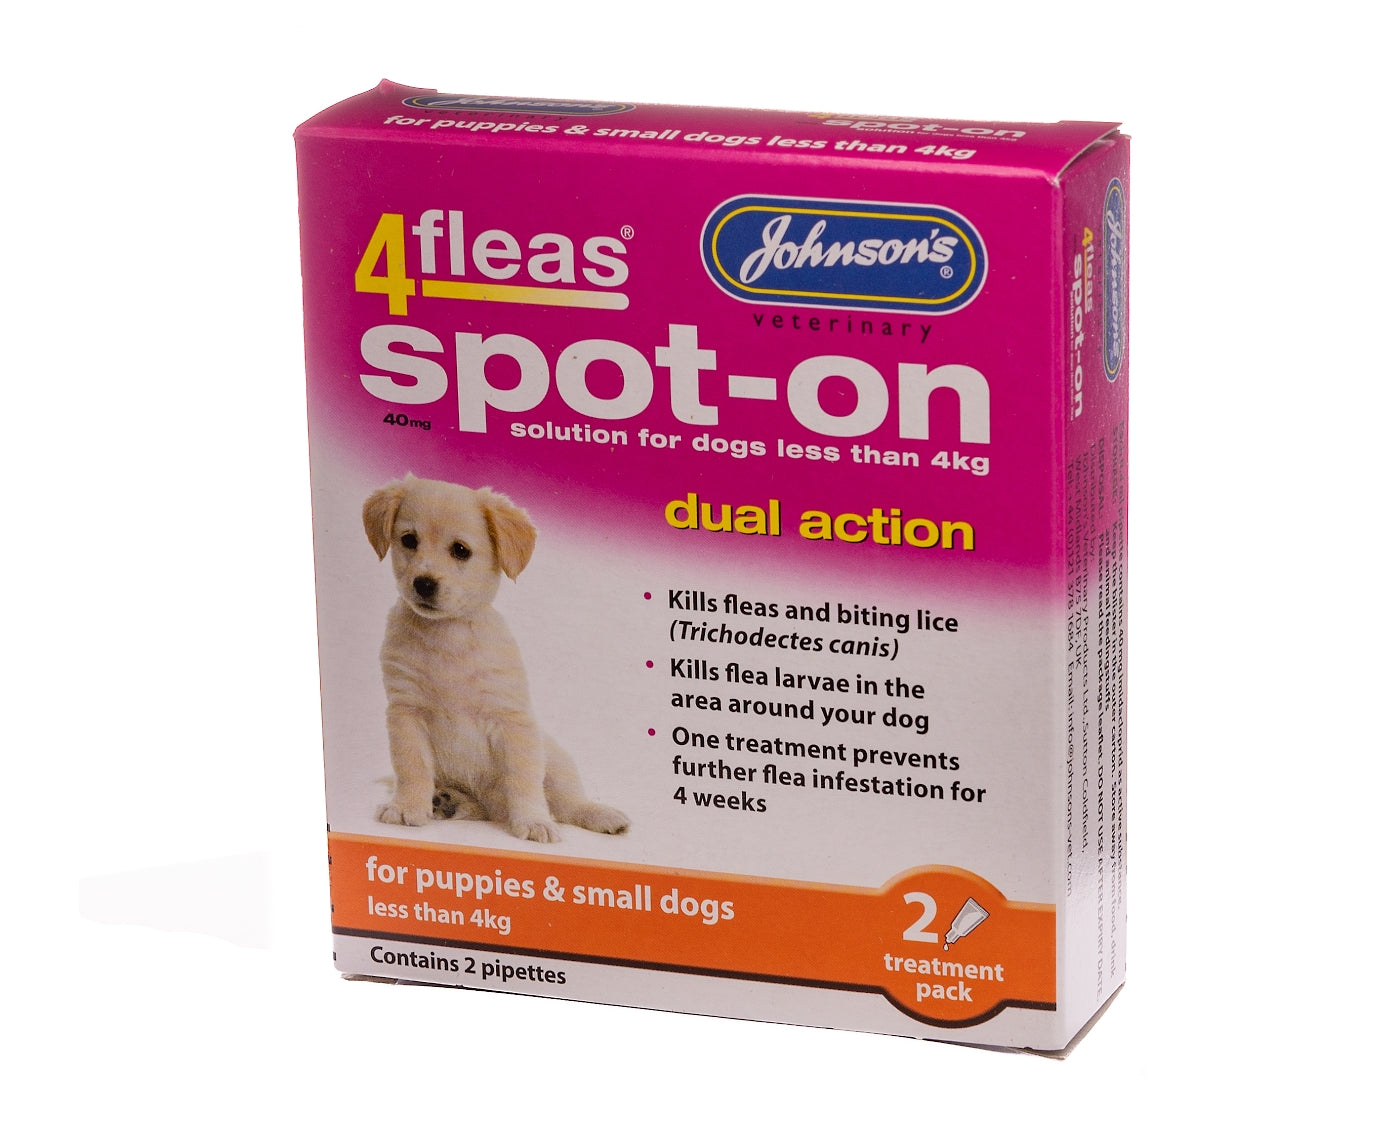 Johnson's - 4fleas Spot-on for Puppies and Small Dogs less than 4kg - 2 x pipettes